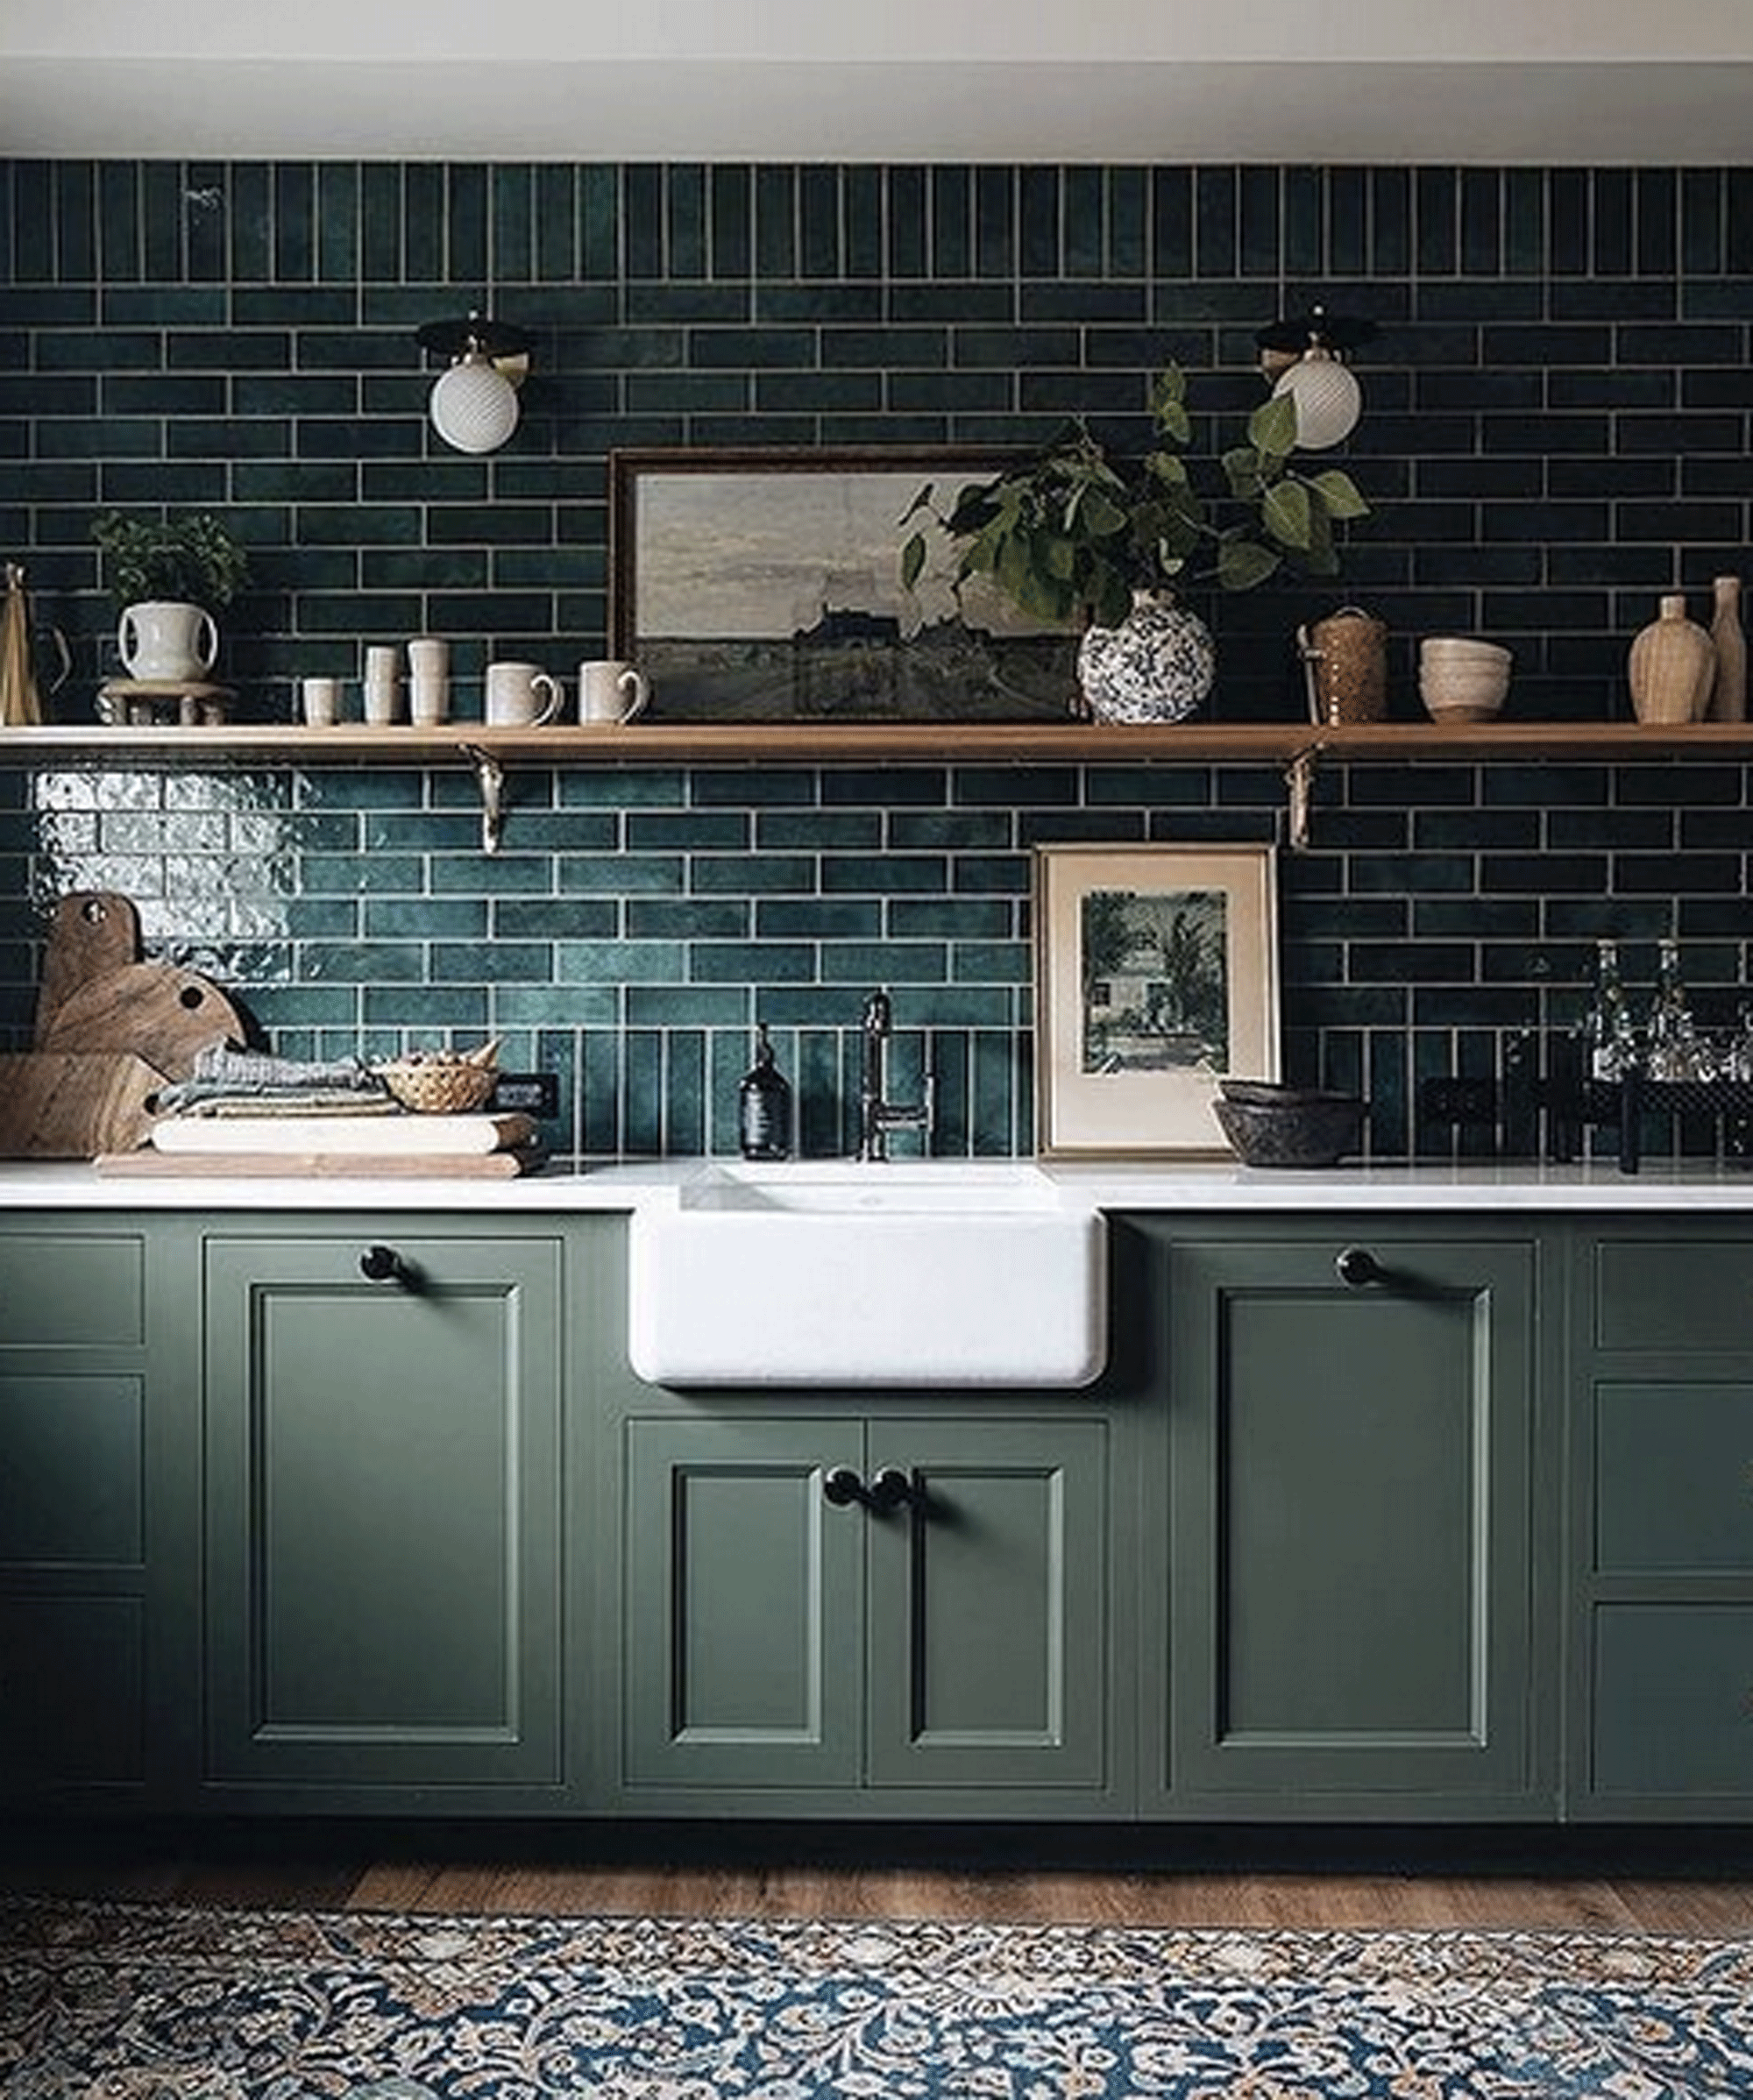 Kitchen with green tiles and green cabinetry